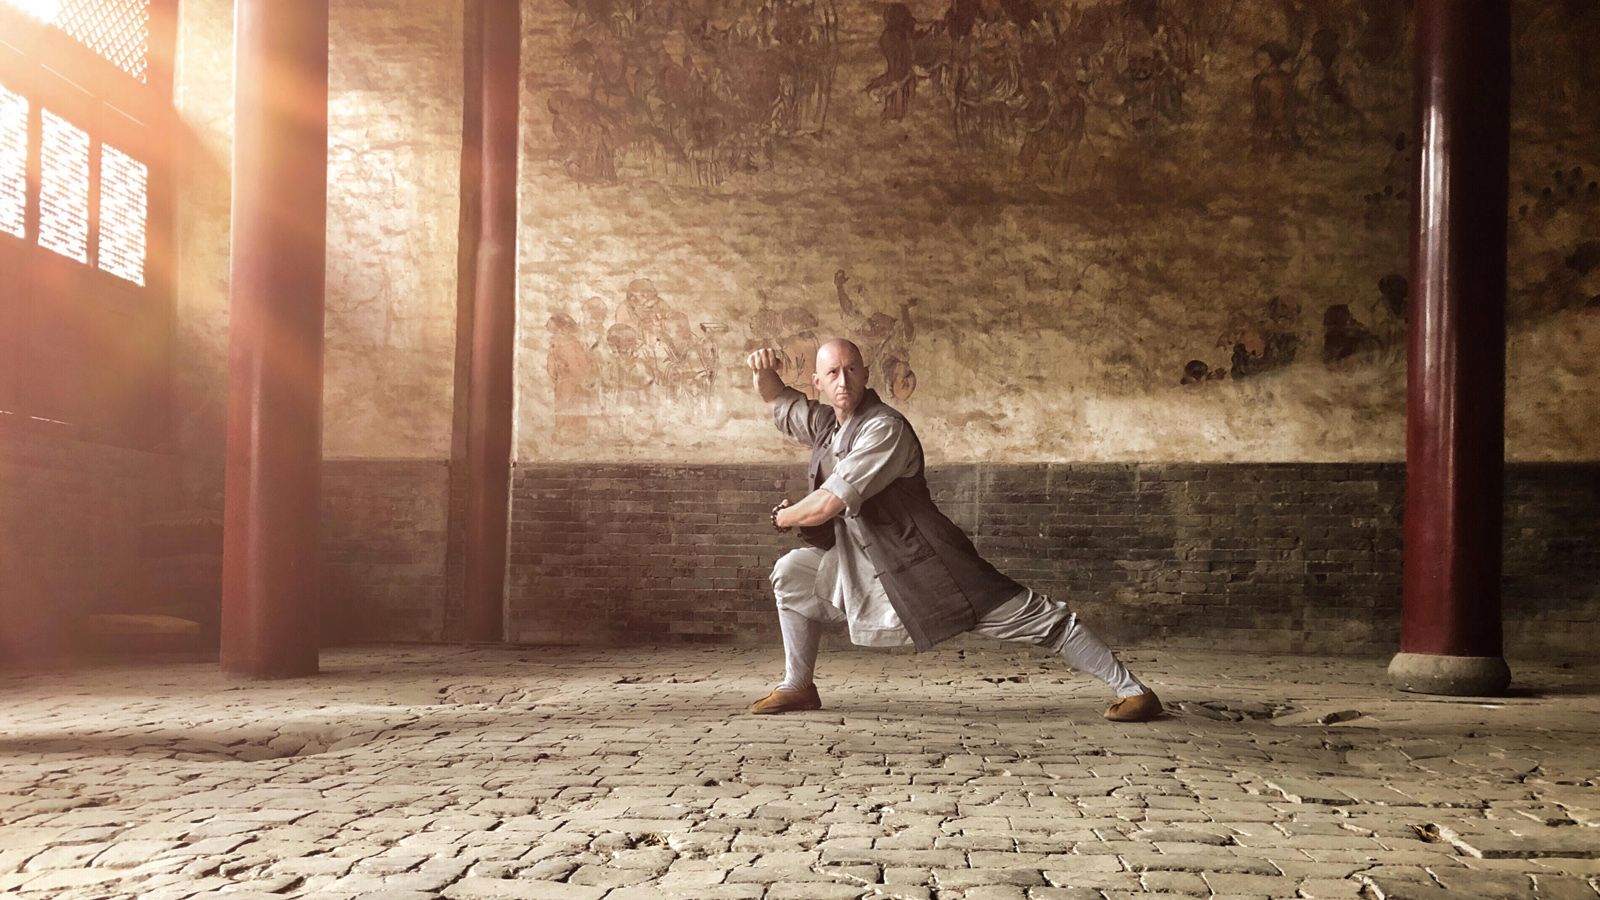 Meditate With A Master Shaolin Monk At Hangzhou's Famed West Lake. A Magazine Singapore